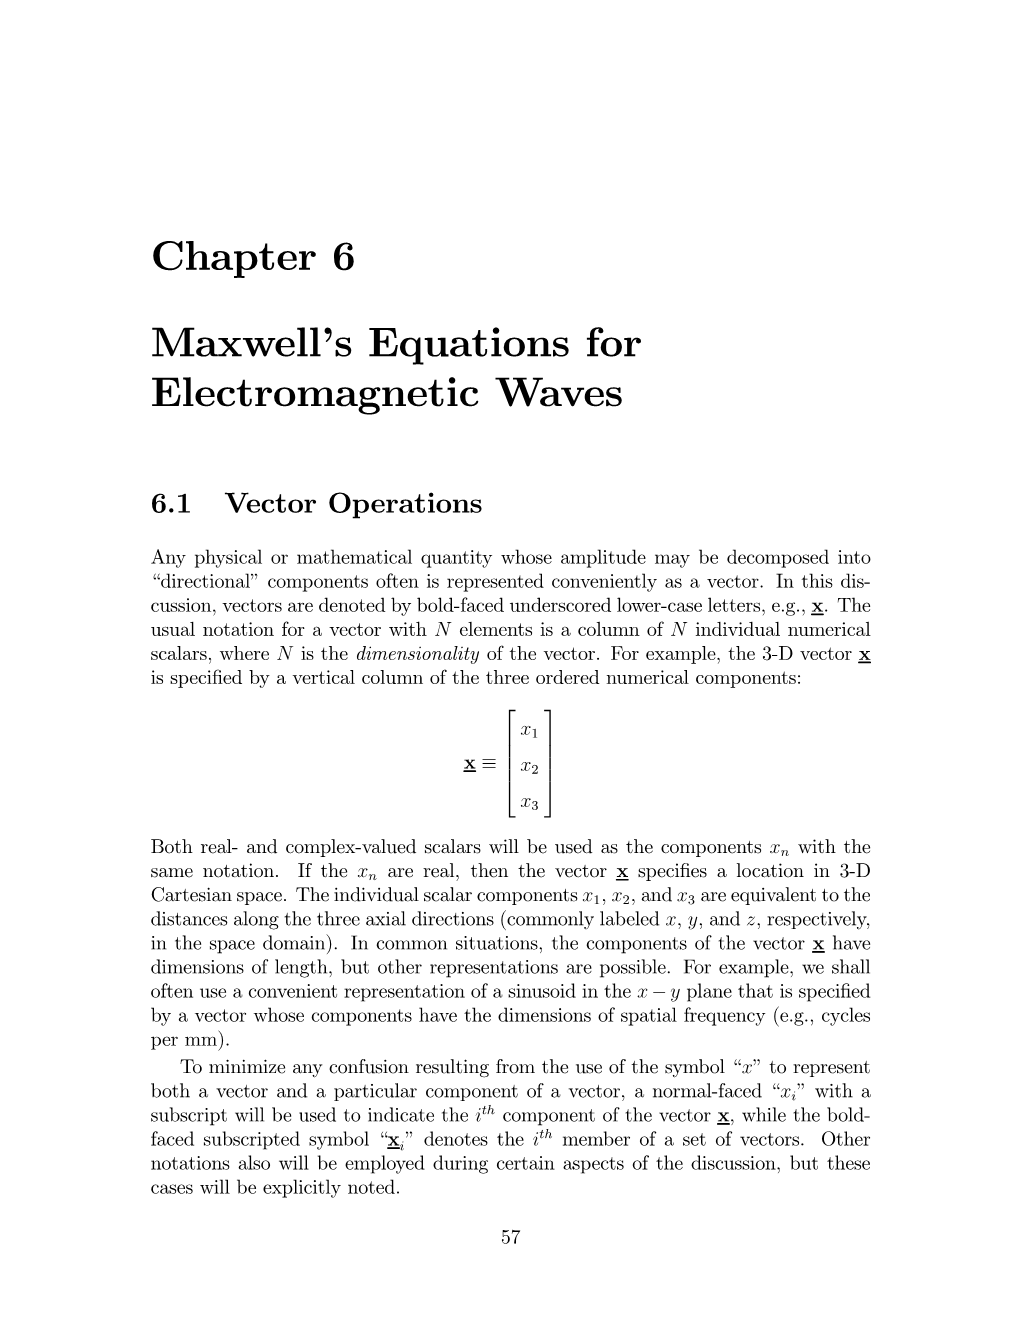 Chapter 6 Maxwell's Equations for Electromagnetic Waves